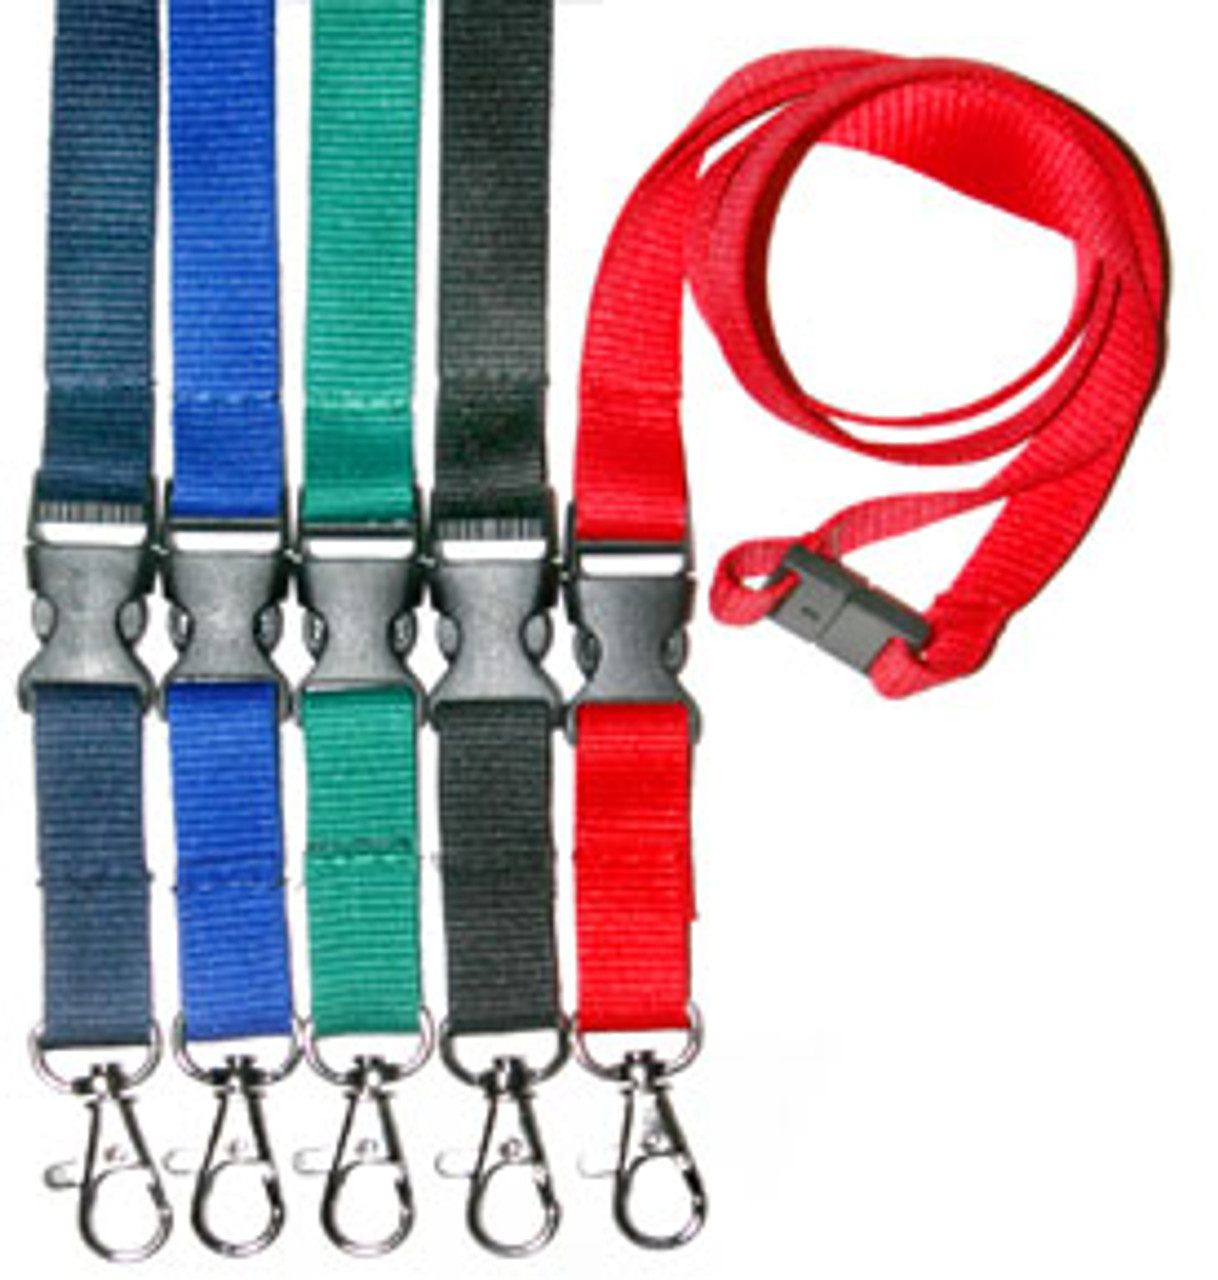 5/8 Wide Flat Lanyard with Safety Breakaway, Release Buckle and